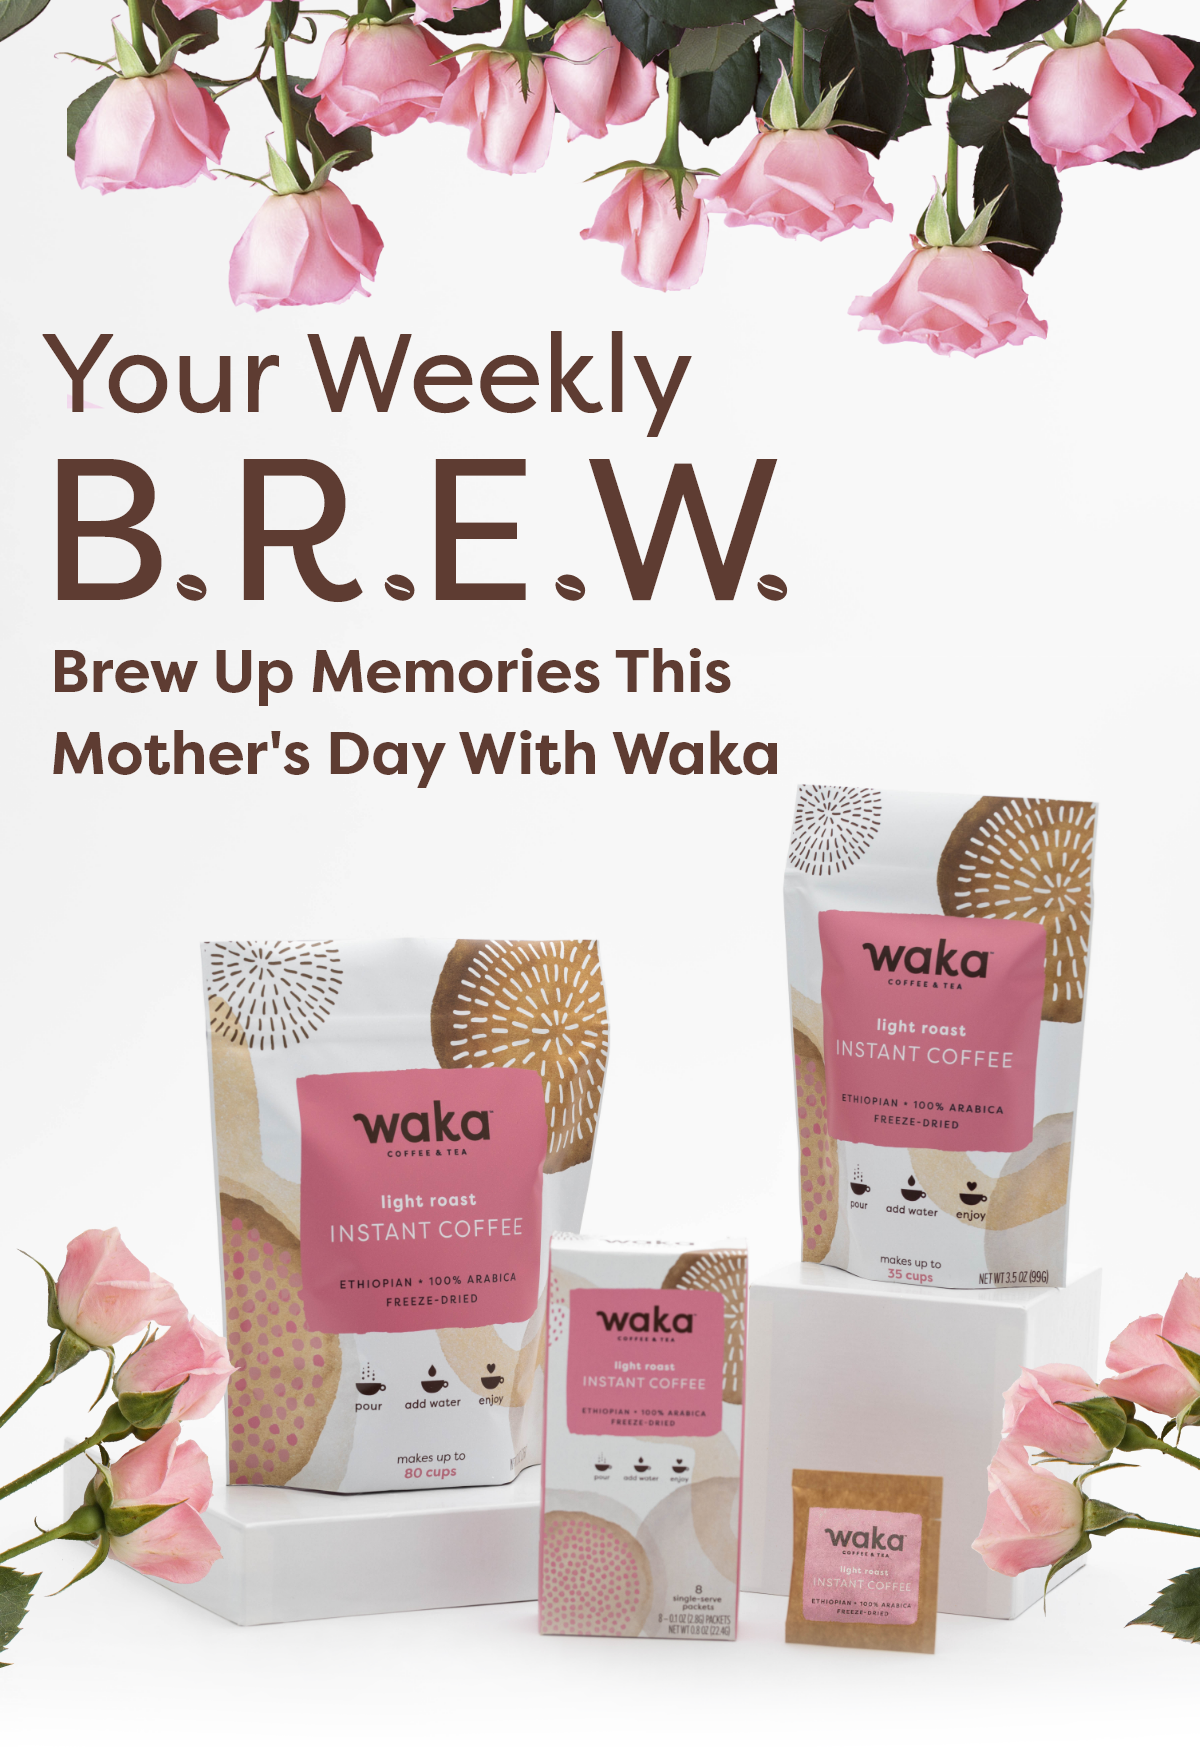 Your Weekly B.R.E.W. Brew Up Memories this Mother's Day with Waka